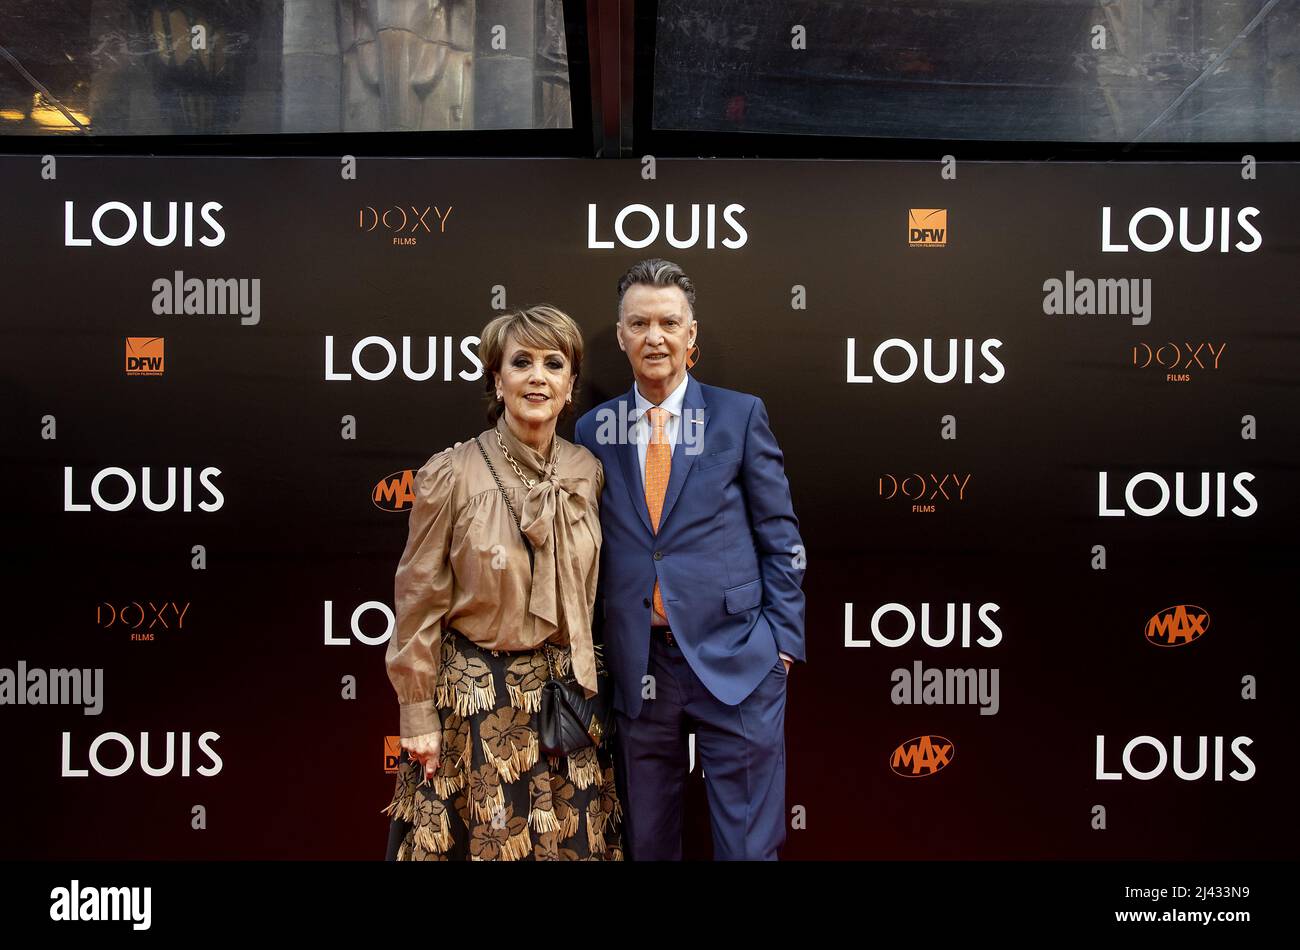 Amsterdam, Netherlands. 11th Apr, 2022. AMSTERDAM - Louis van Gaal and his  wife Truus van Gaal on the red carpet prior to the premiere of LOUIS. The  documentary is about the life